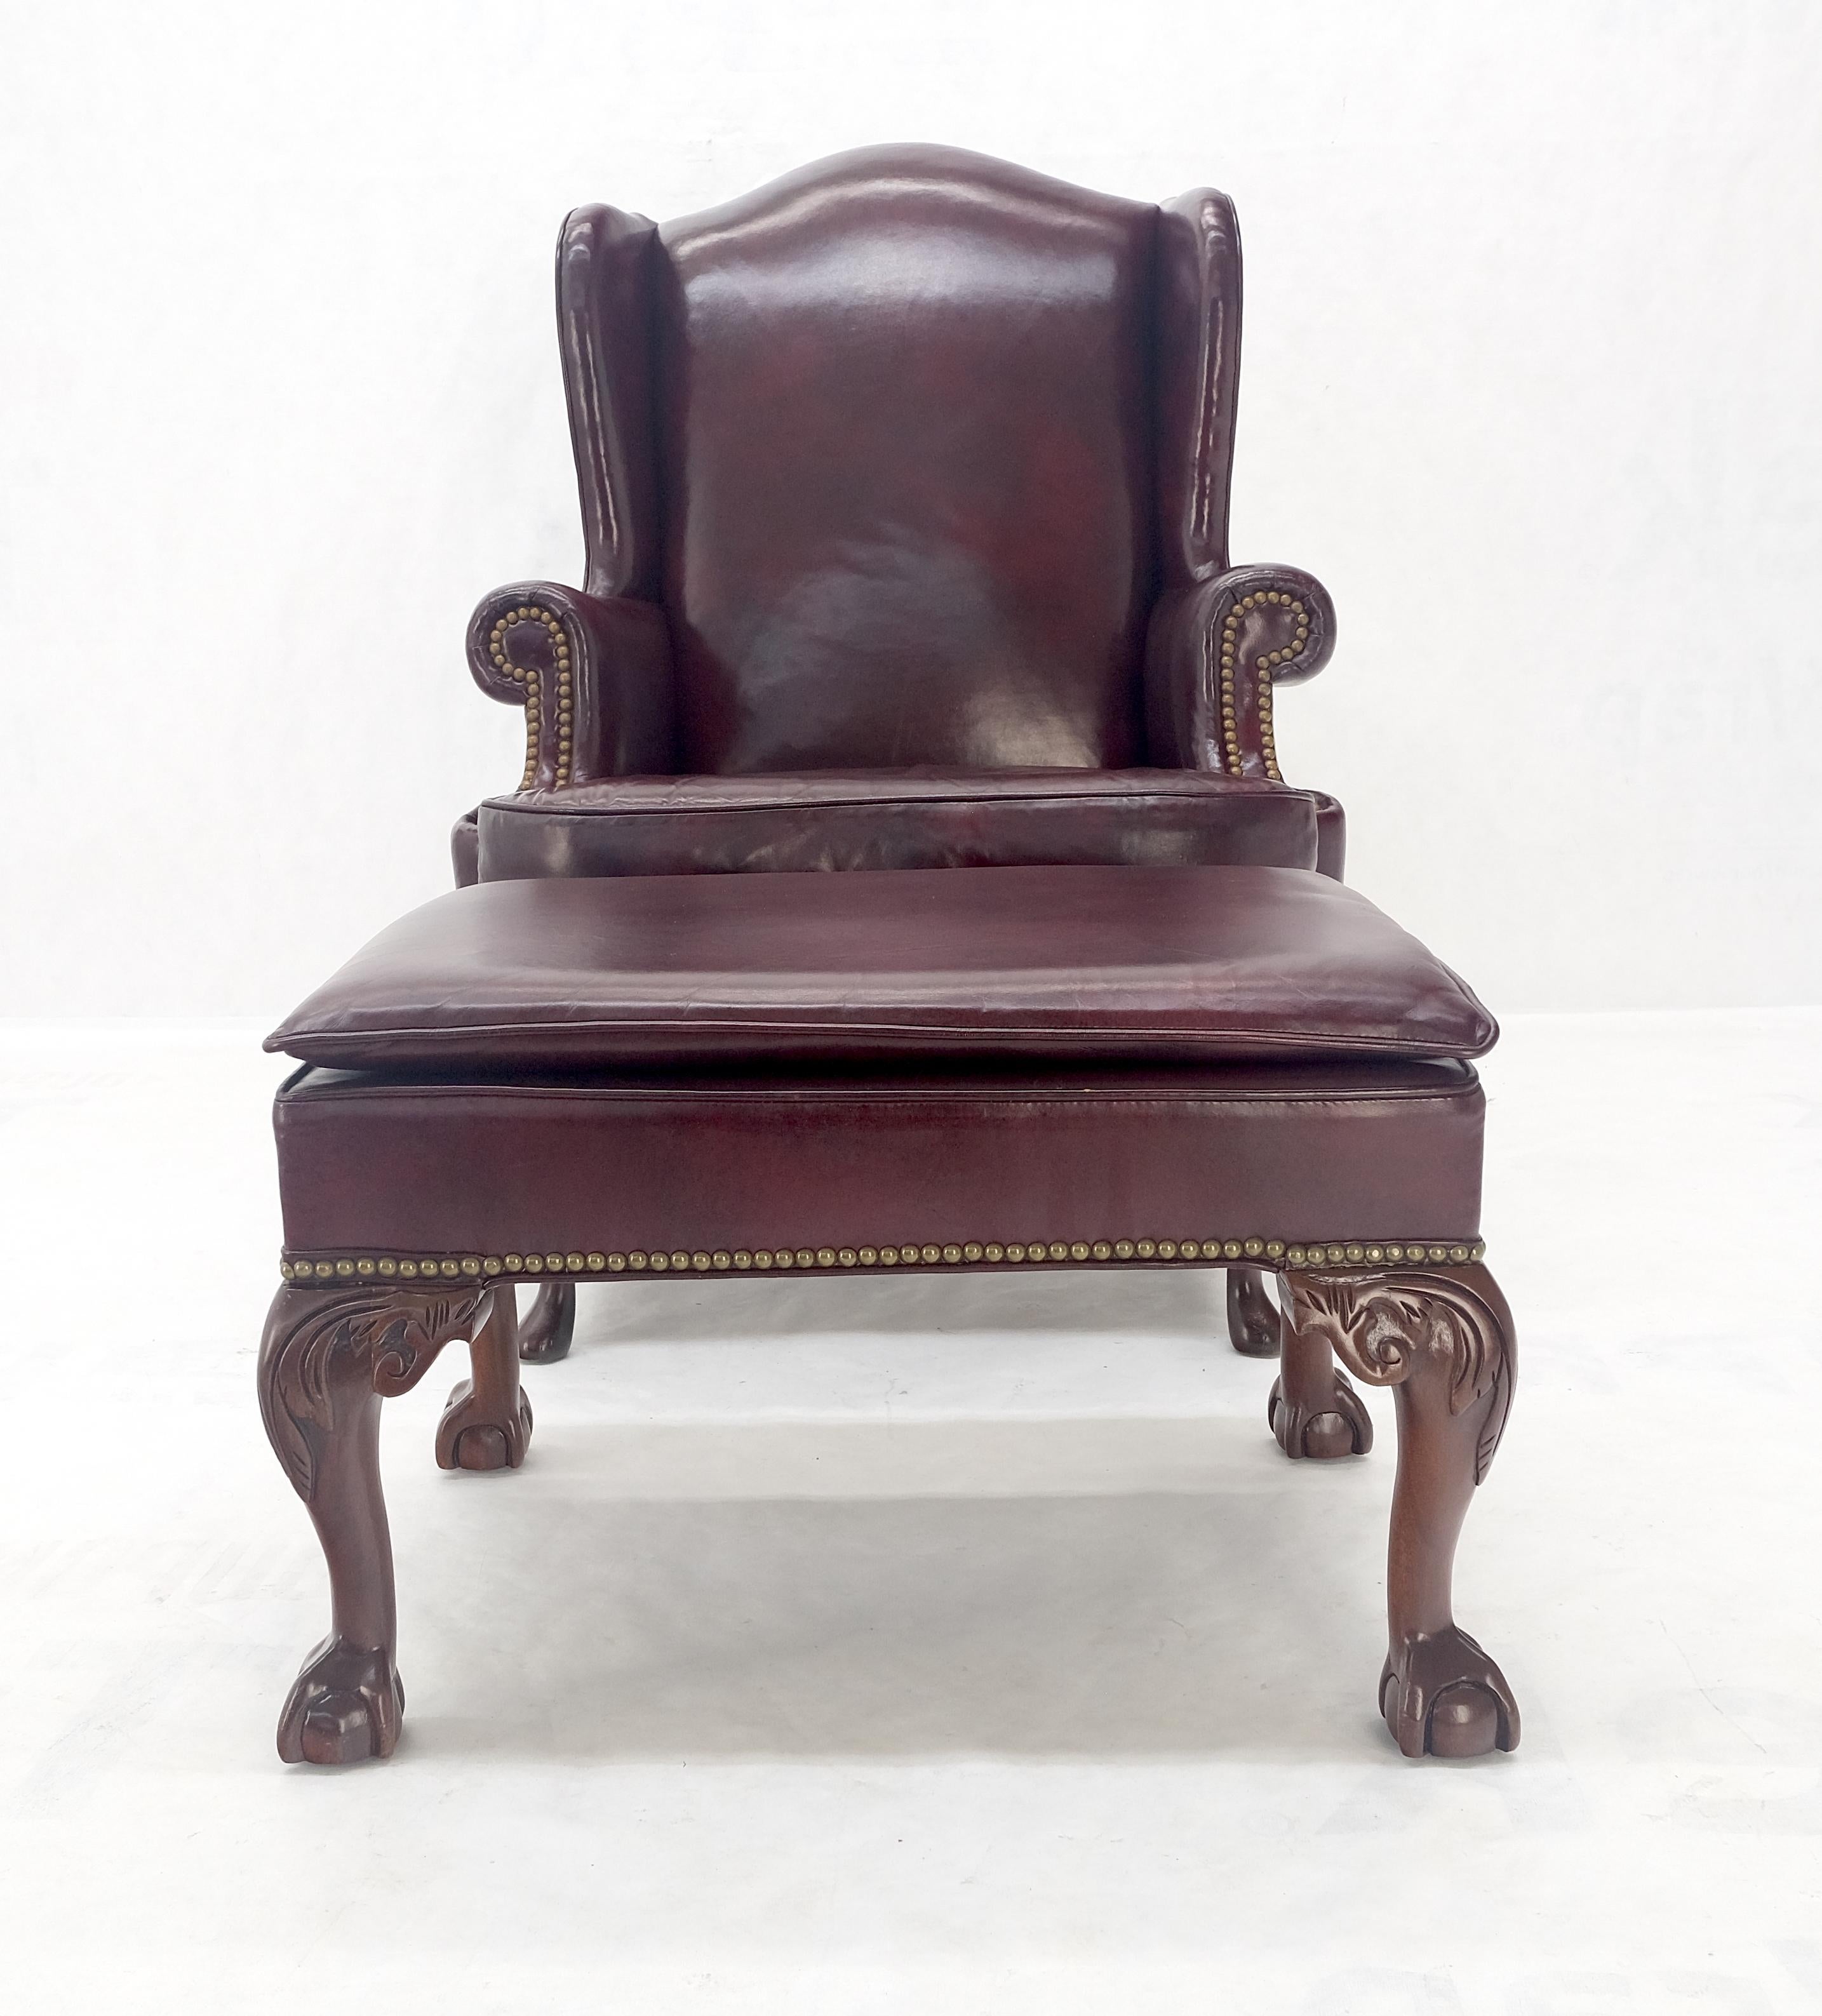 Kindel Burgundy Leather Upholstery Carved Mahogany Legs Wingback Chair & Ottoman en vente 2